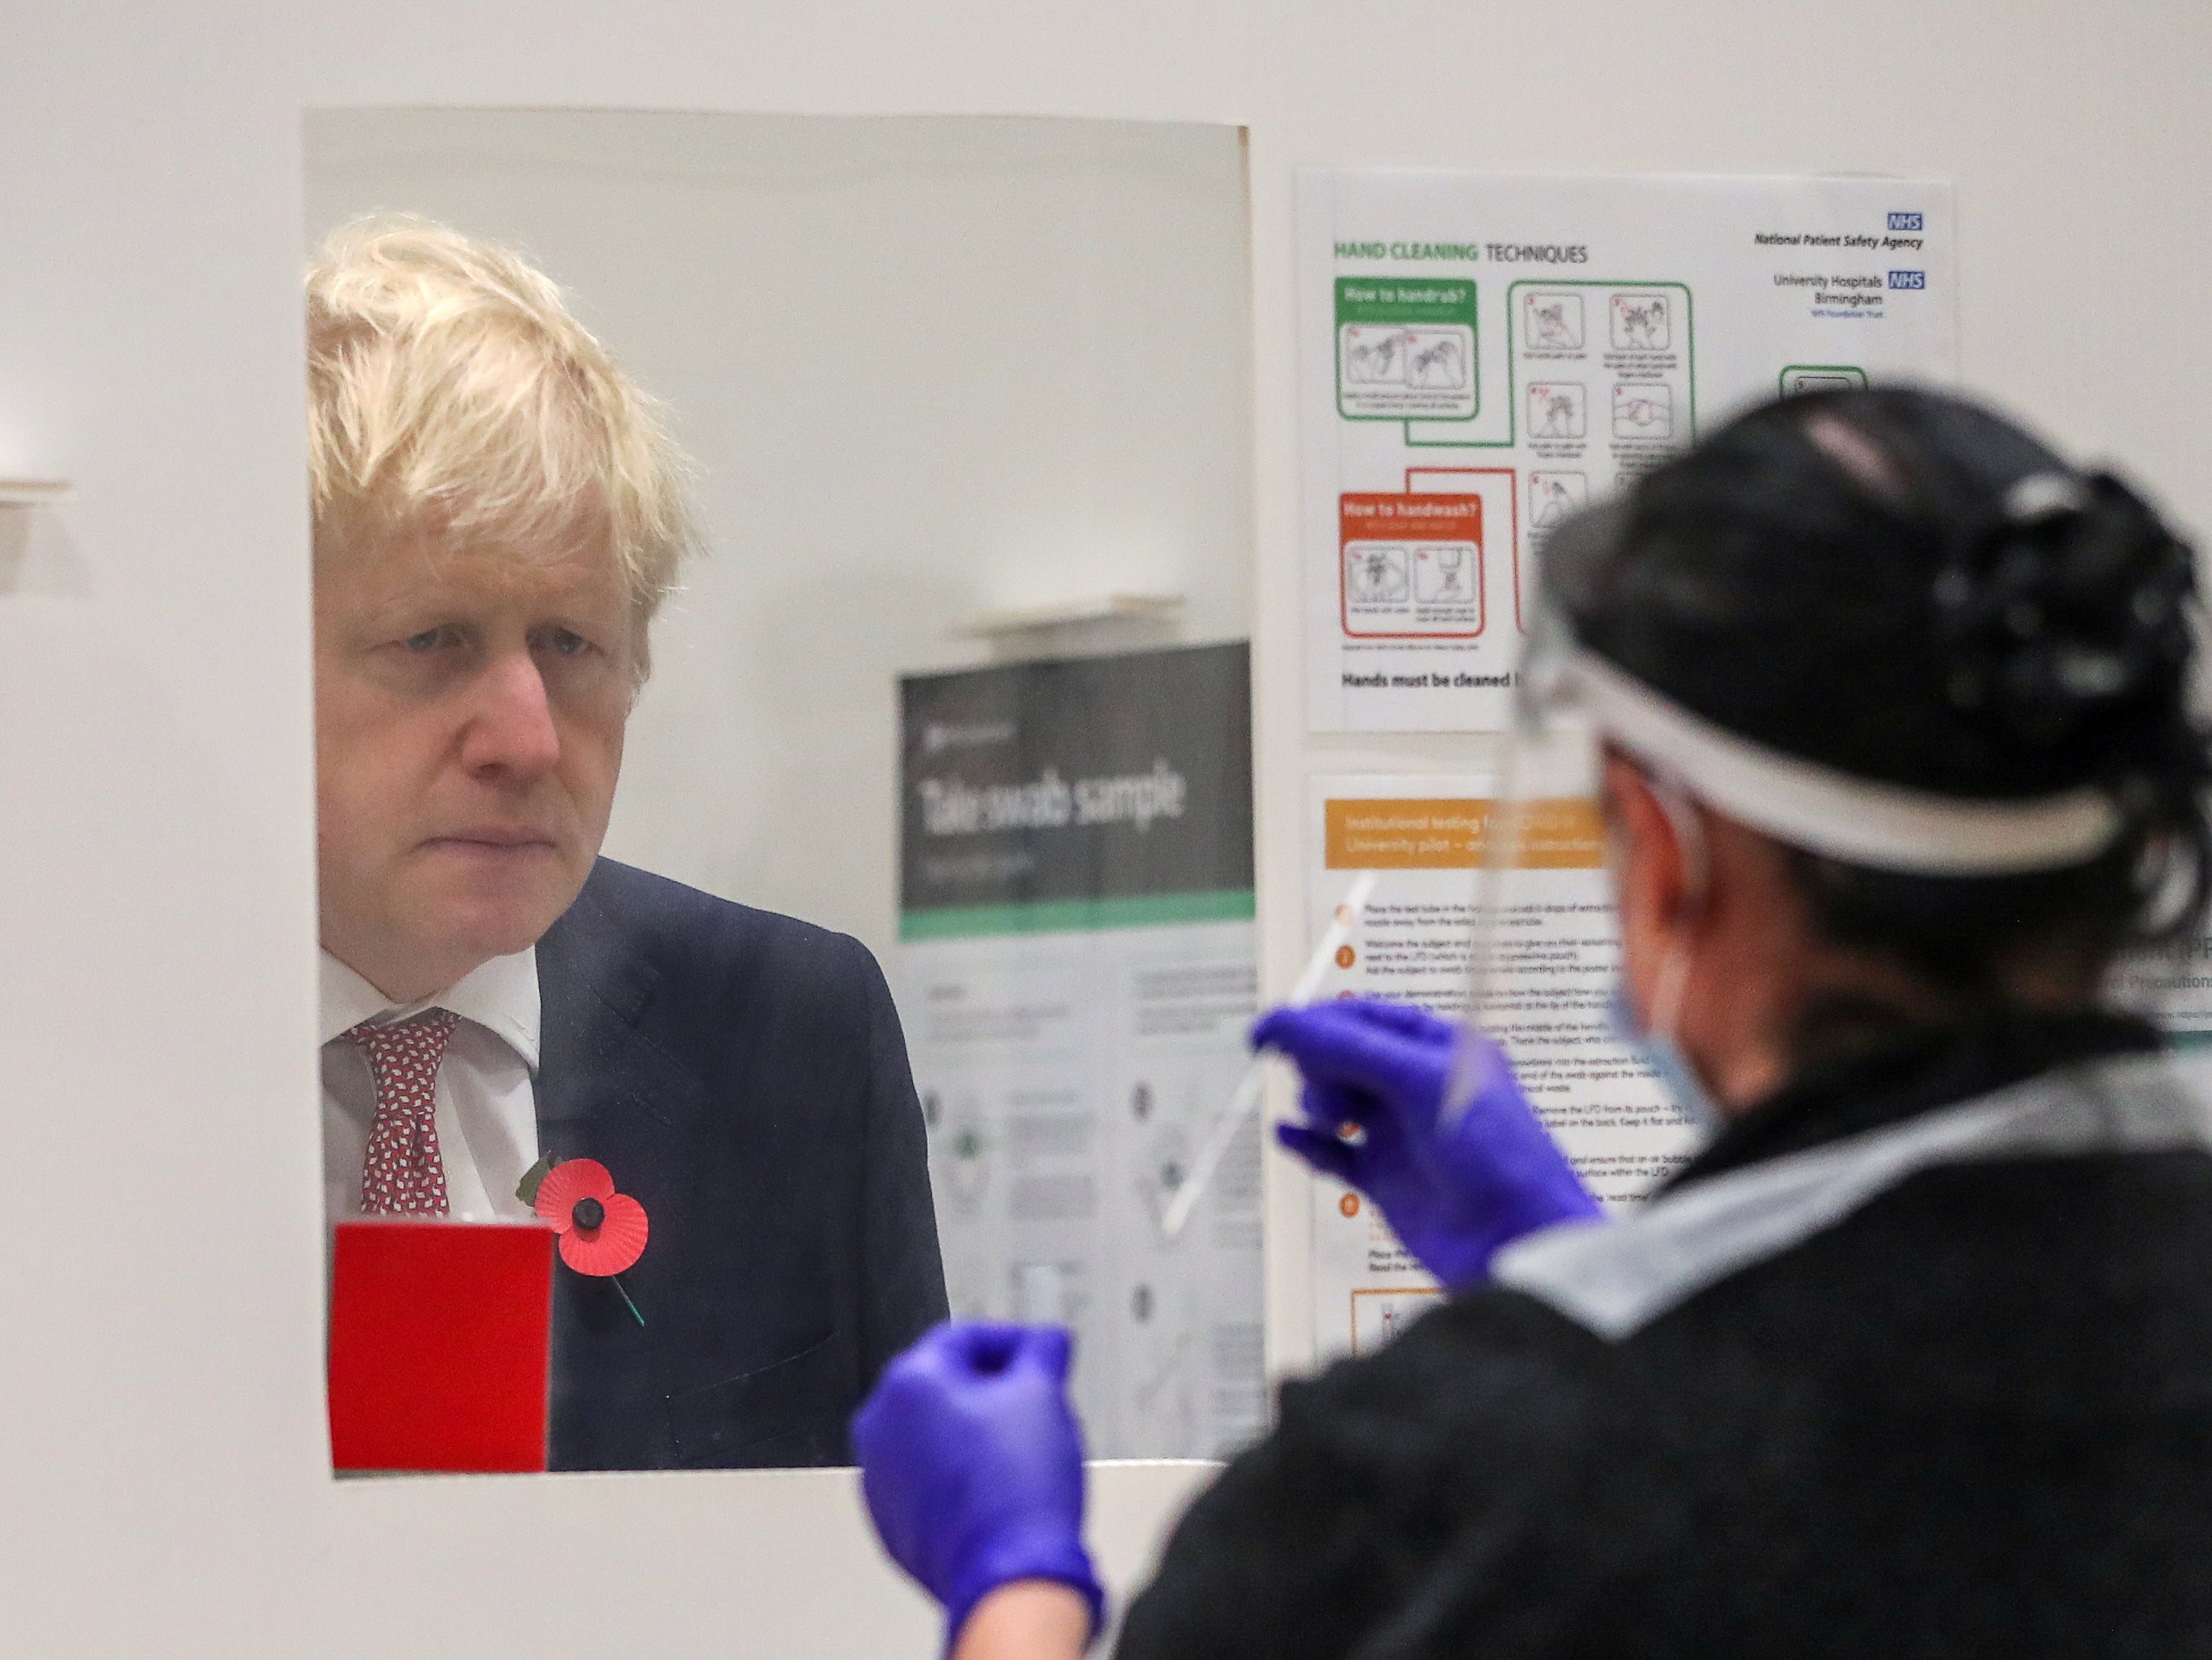 Boris Johnson will face tough decisions on controlling the virus after lockdown ends